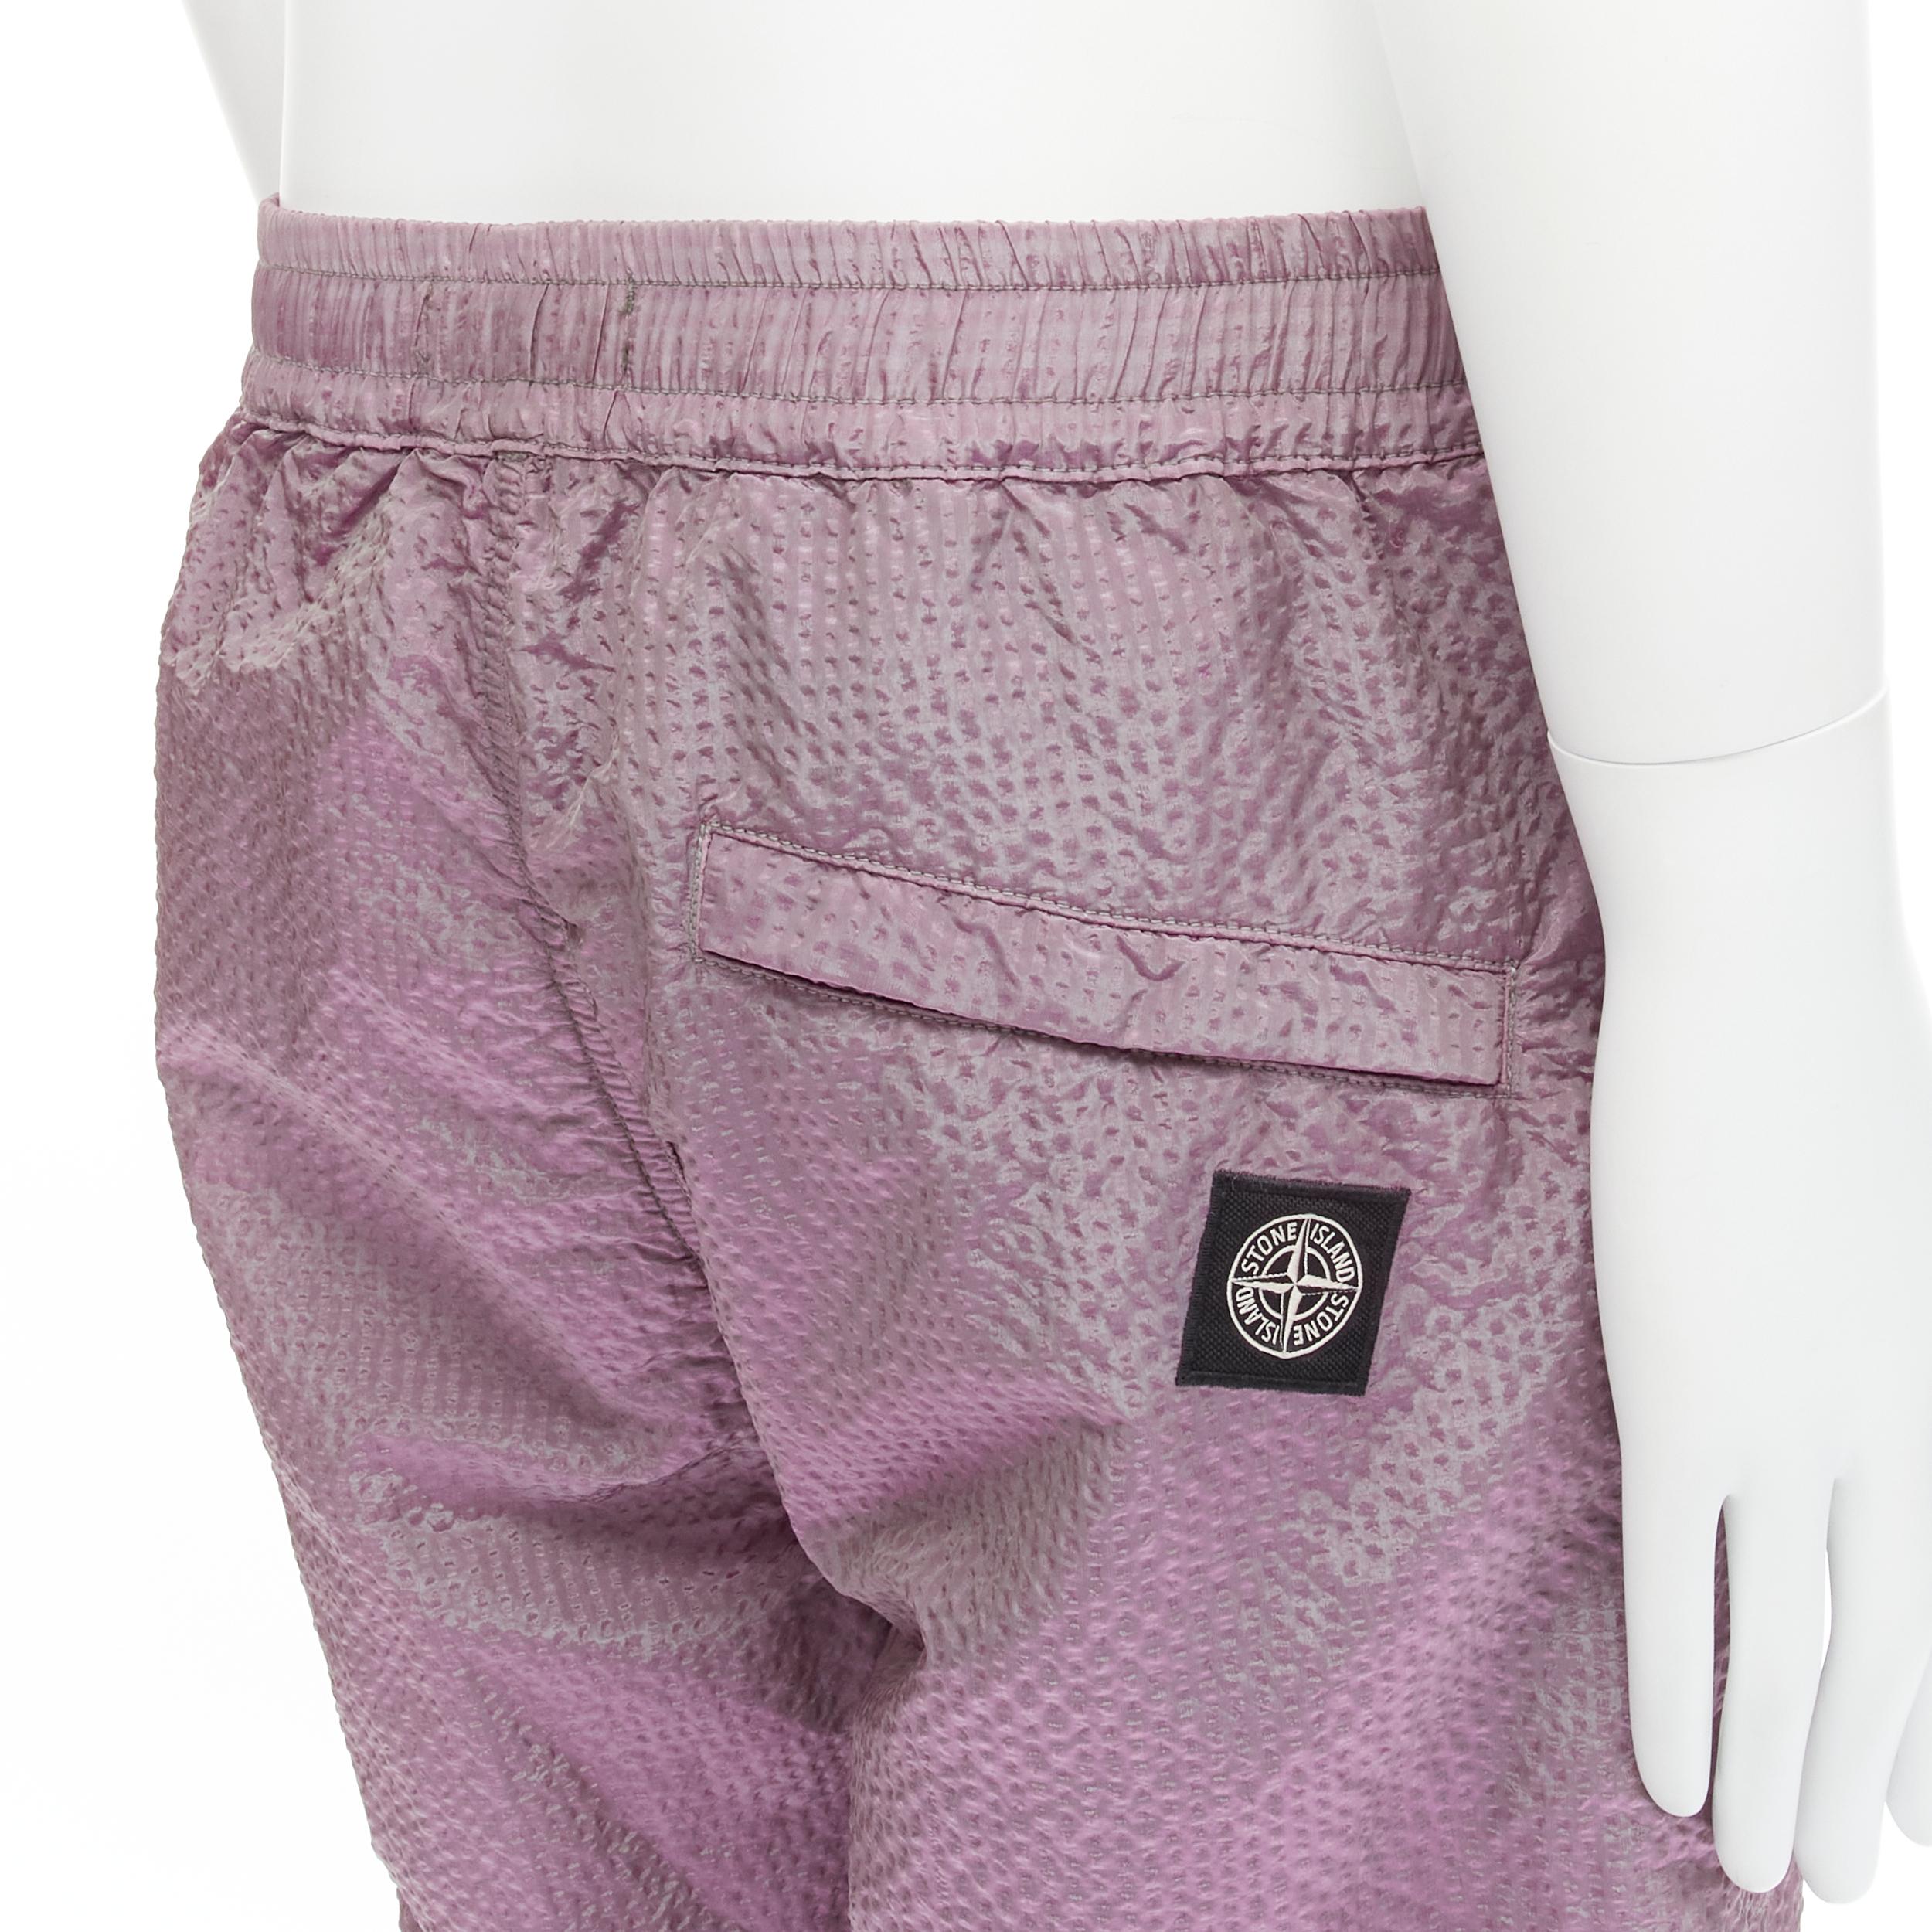 STONE ISLAND iridescent purple seersucker nylon track pants M 
Reference: CNLE/A00175 
Brand: Stone Island 
Material: Nylon 
Color: Purple 
Pattern: Solid 
Extra Detail: Elasticated waist. Zipped pockets. Zip fly. Elasticated cuff. 

CONDITION: